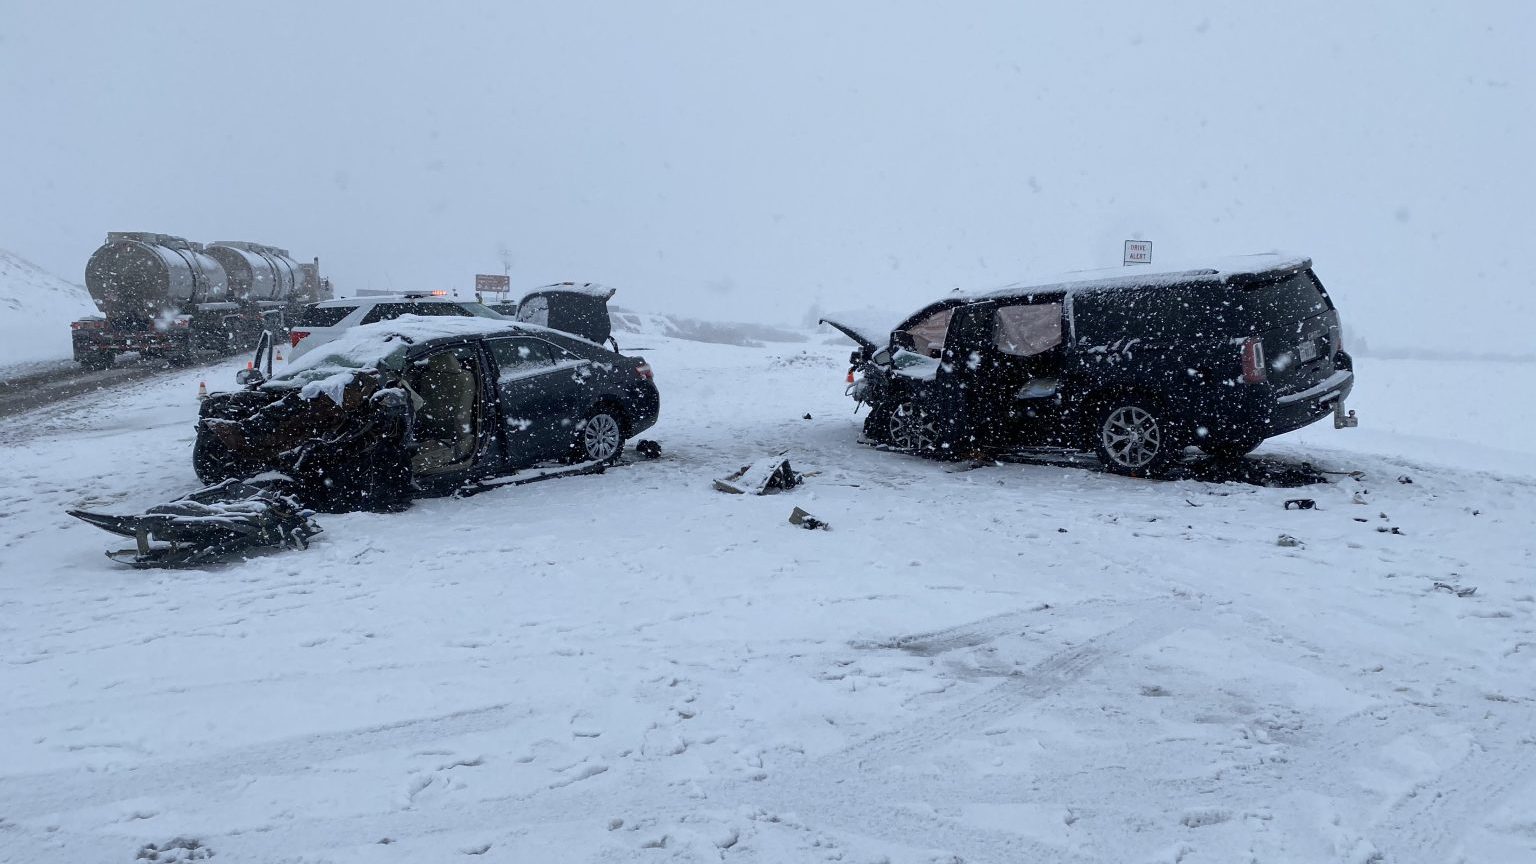 the scene of the crash in wasatch county is pictured, two cars are pictured wrecked...